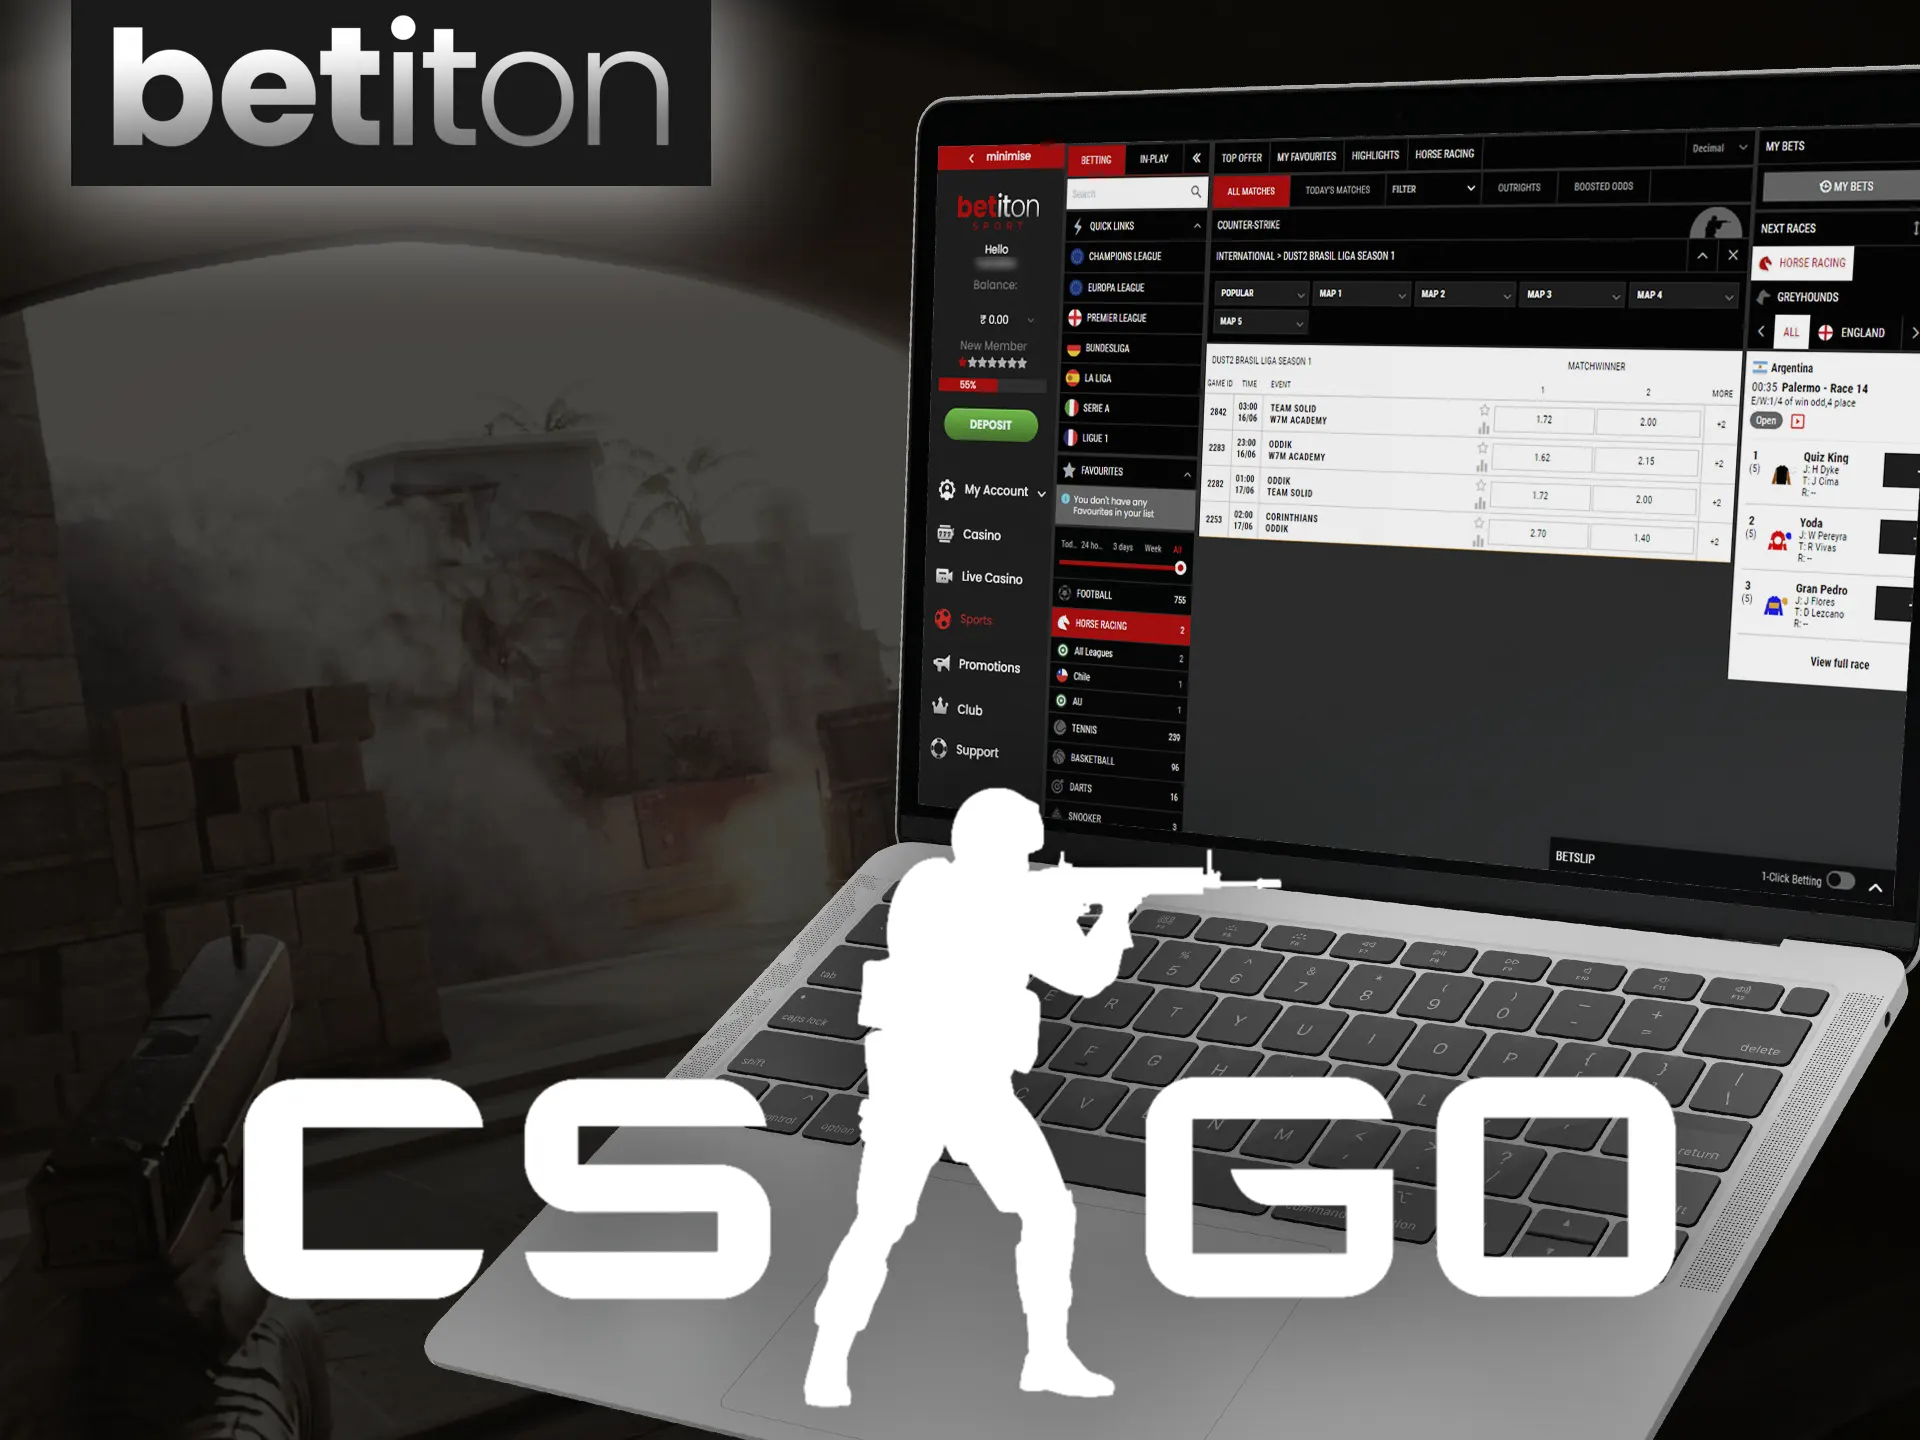 Win money by betting on the most popular esports at the Betiton.